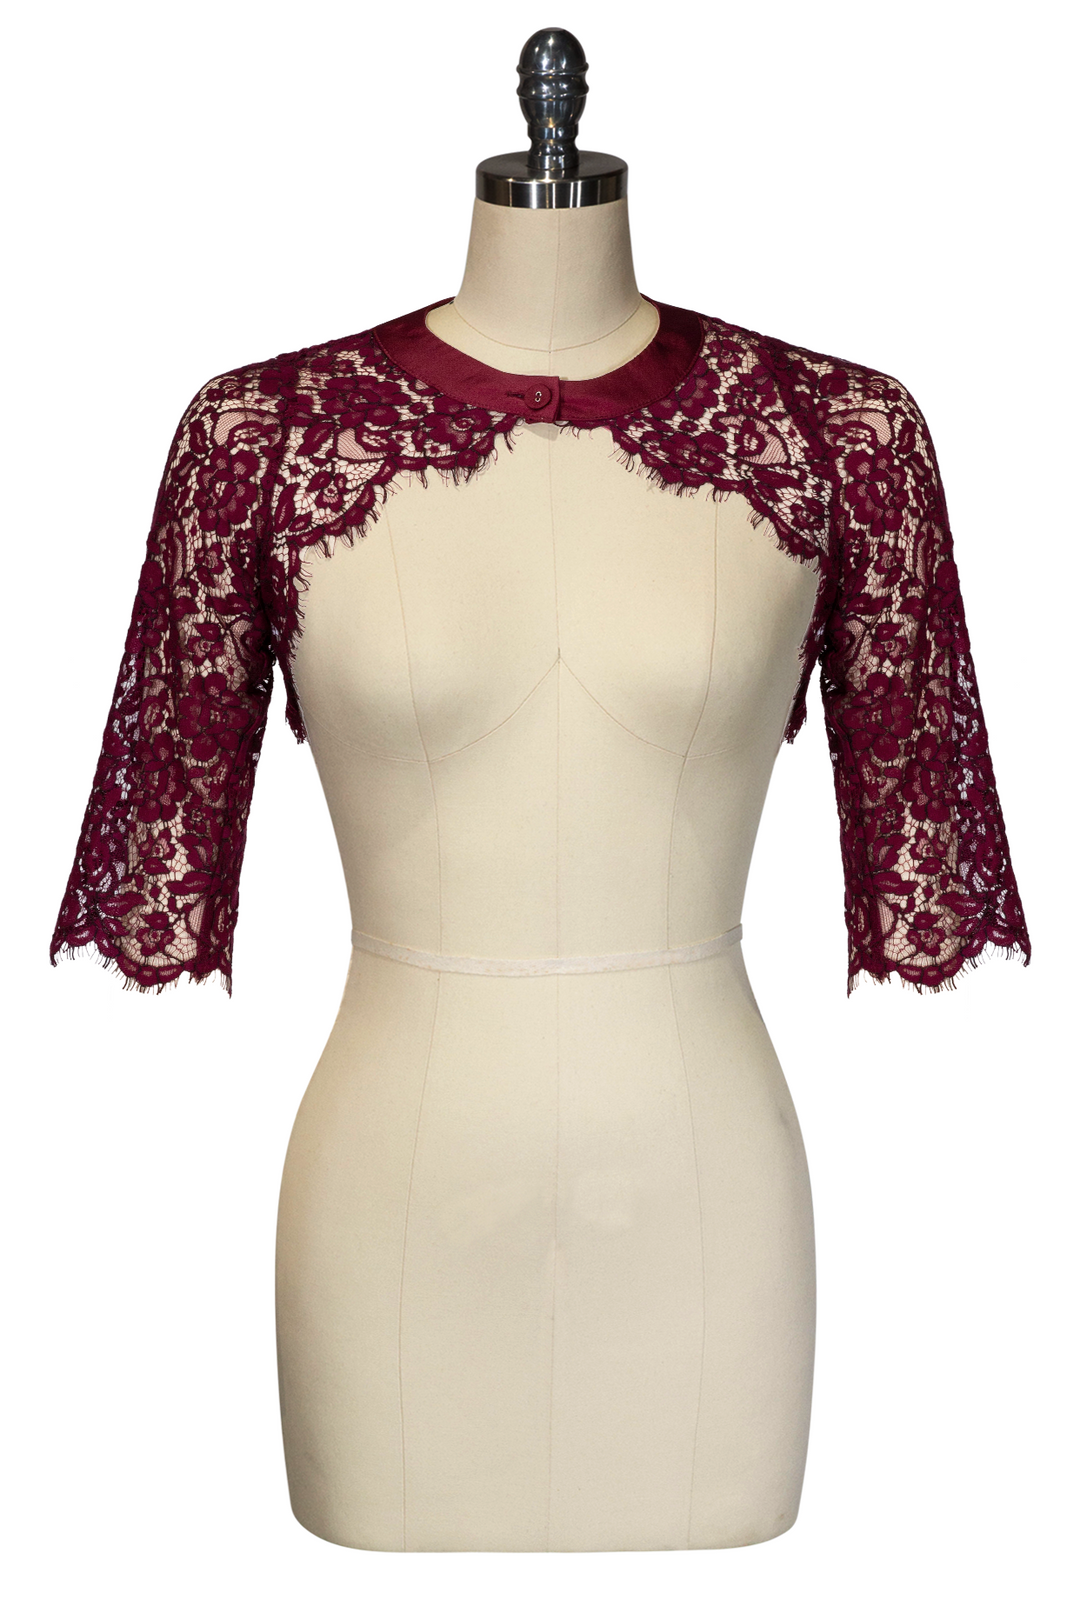 Capone Lace Shrug (Burgundy) - Kitten D'Amour